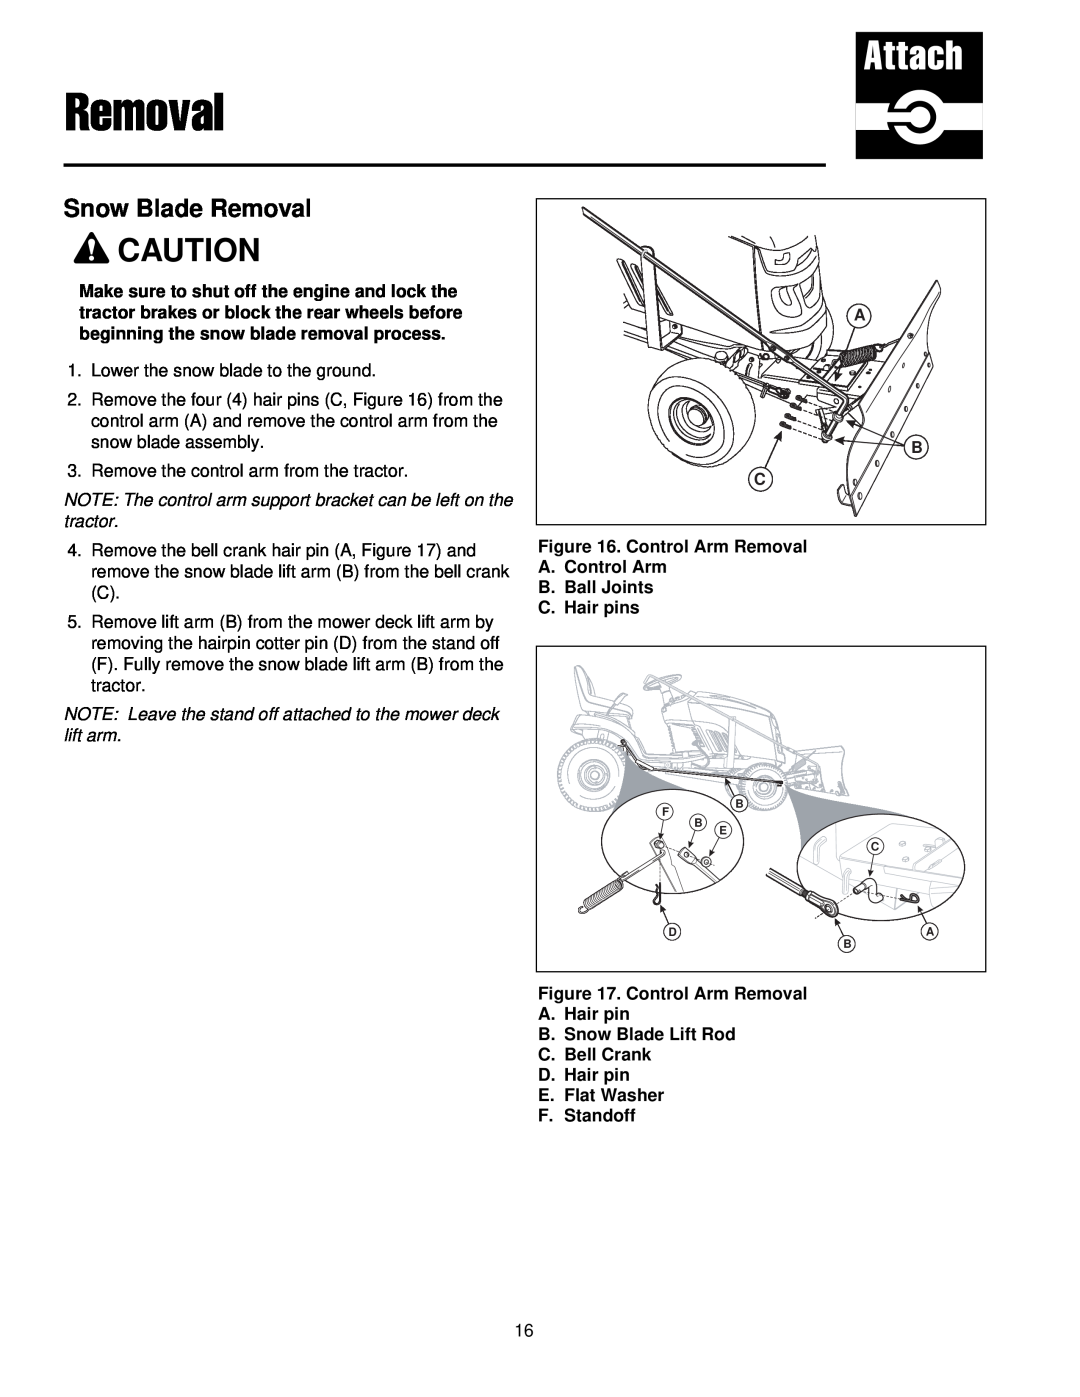 Briggs & Stratton 1694919 manual Snow Blade Removal, NOTE The control arm support bracket can be left on the tractor 